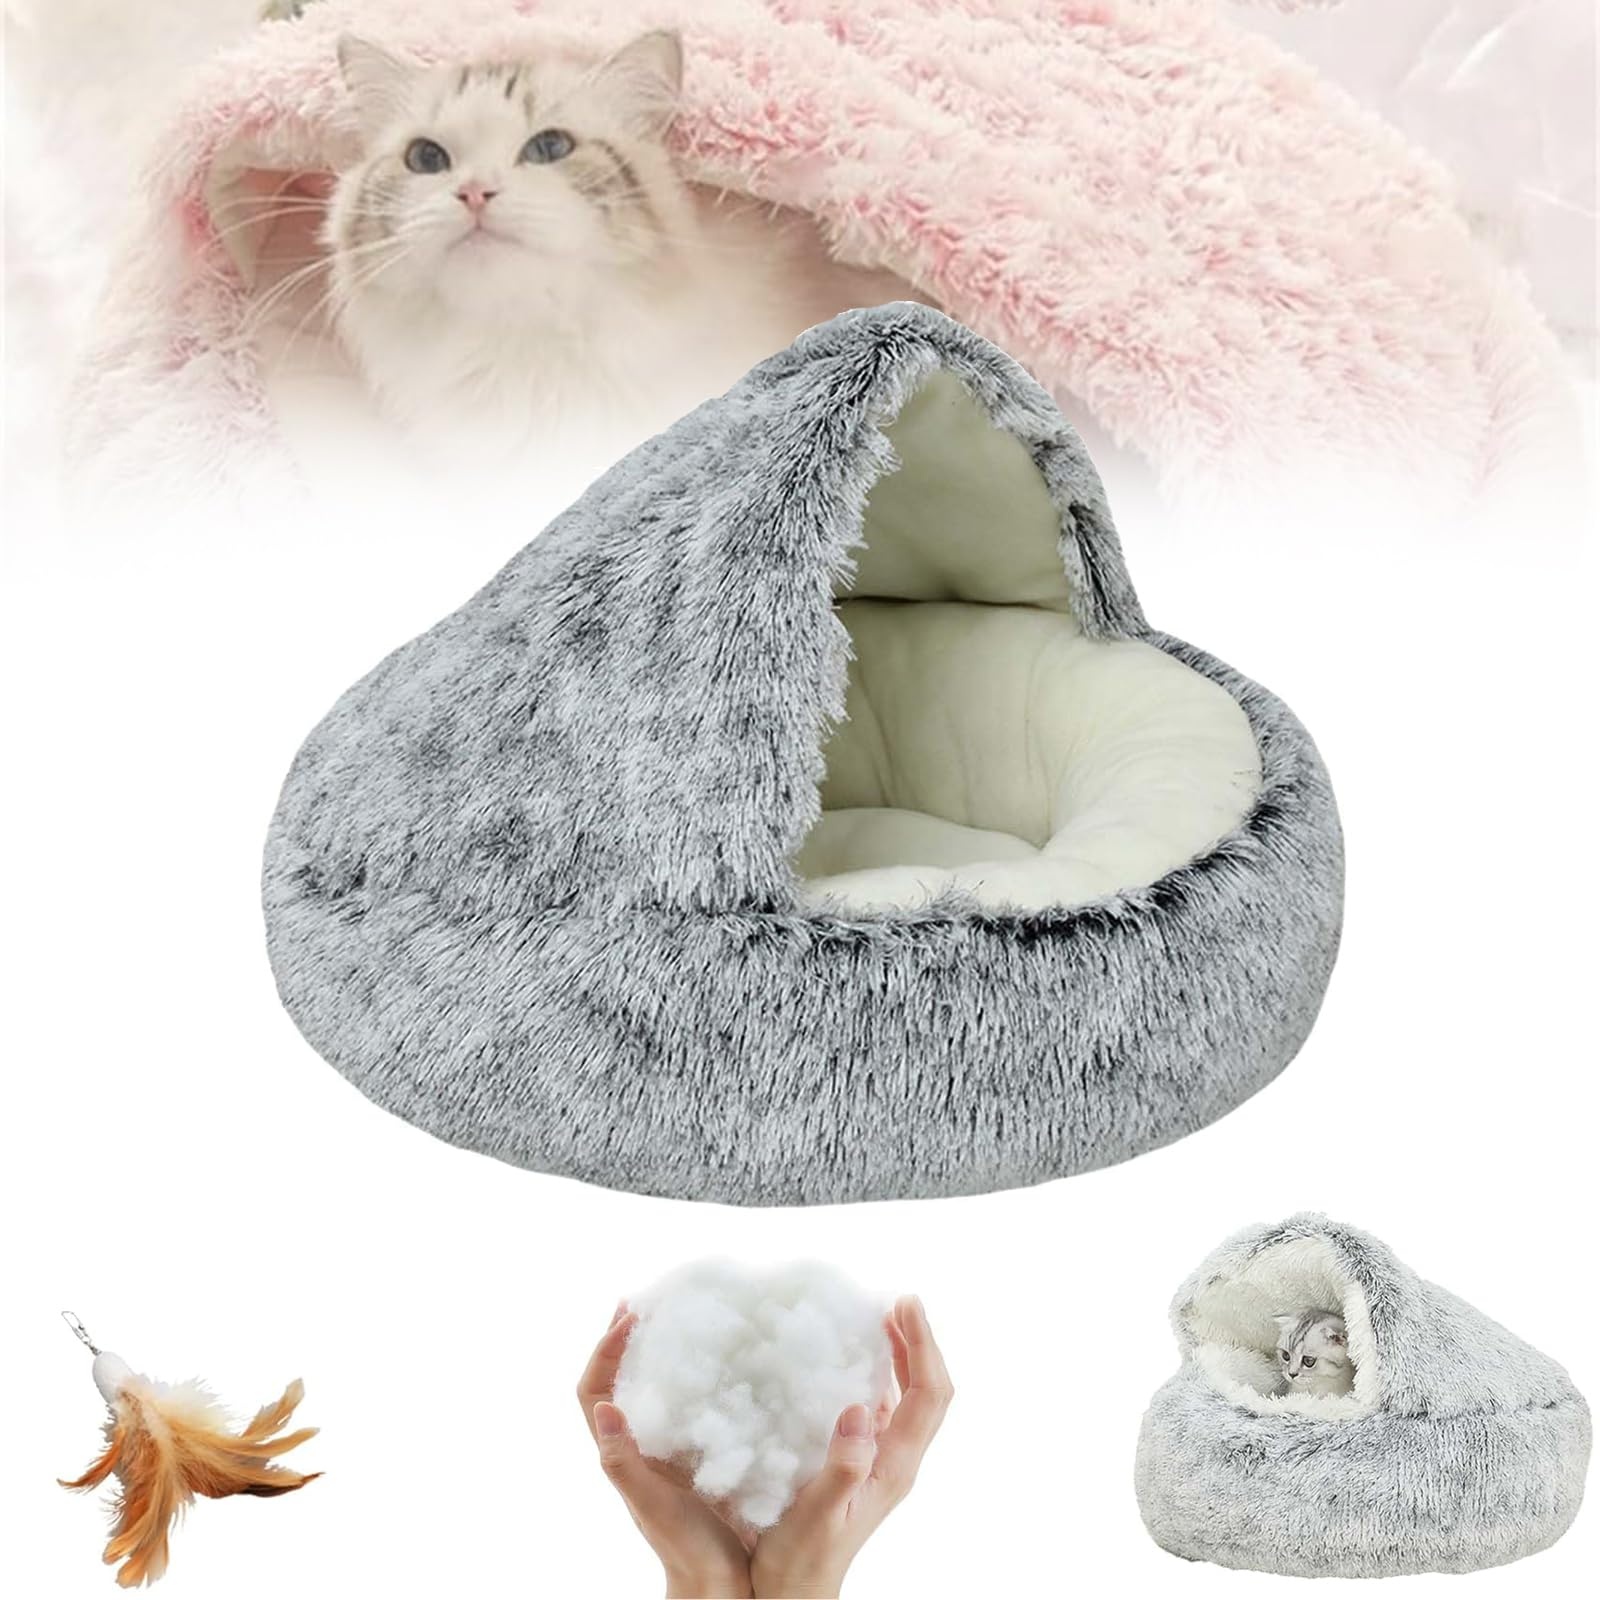 Oueet Cozy Cocoon Pet Bed - Cozy Cocoon Pet Bed for Dogs, Fido Faves Cozy Nook Dog Bed, Winter Pet Plush Bed, Fidofaves Cozy Nook Bed, Round Fluffy Warm Cat Beds with Hooded Cover (M, C Short Velvet)